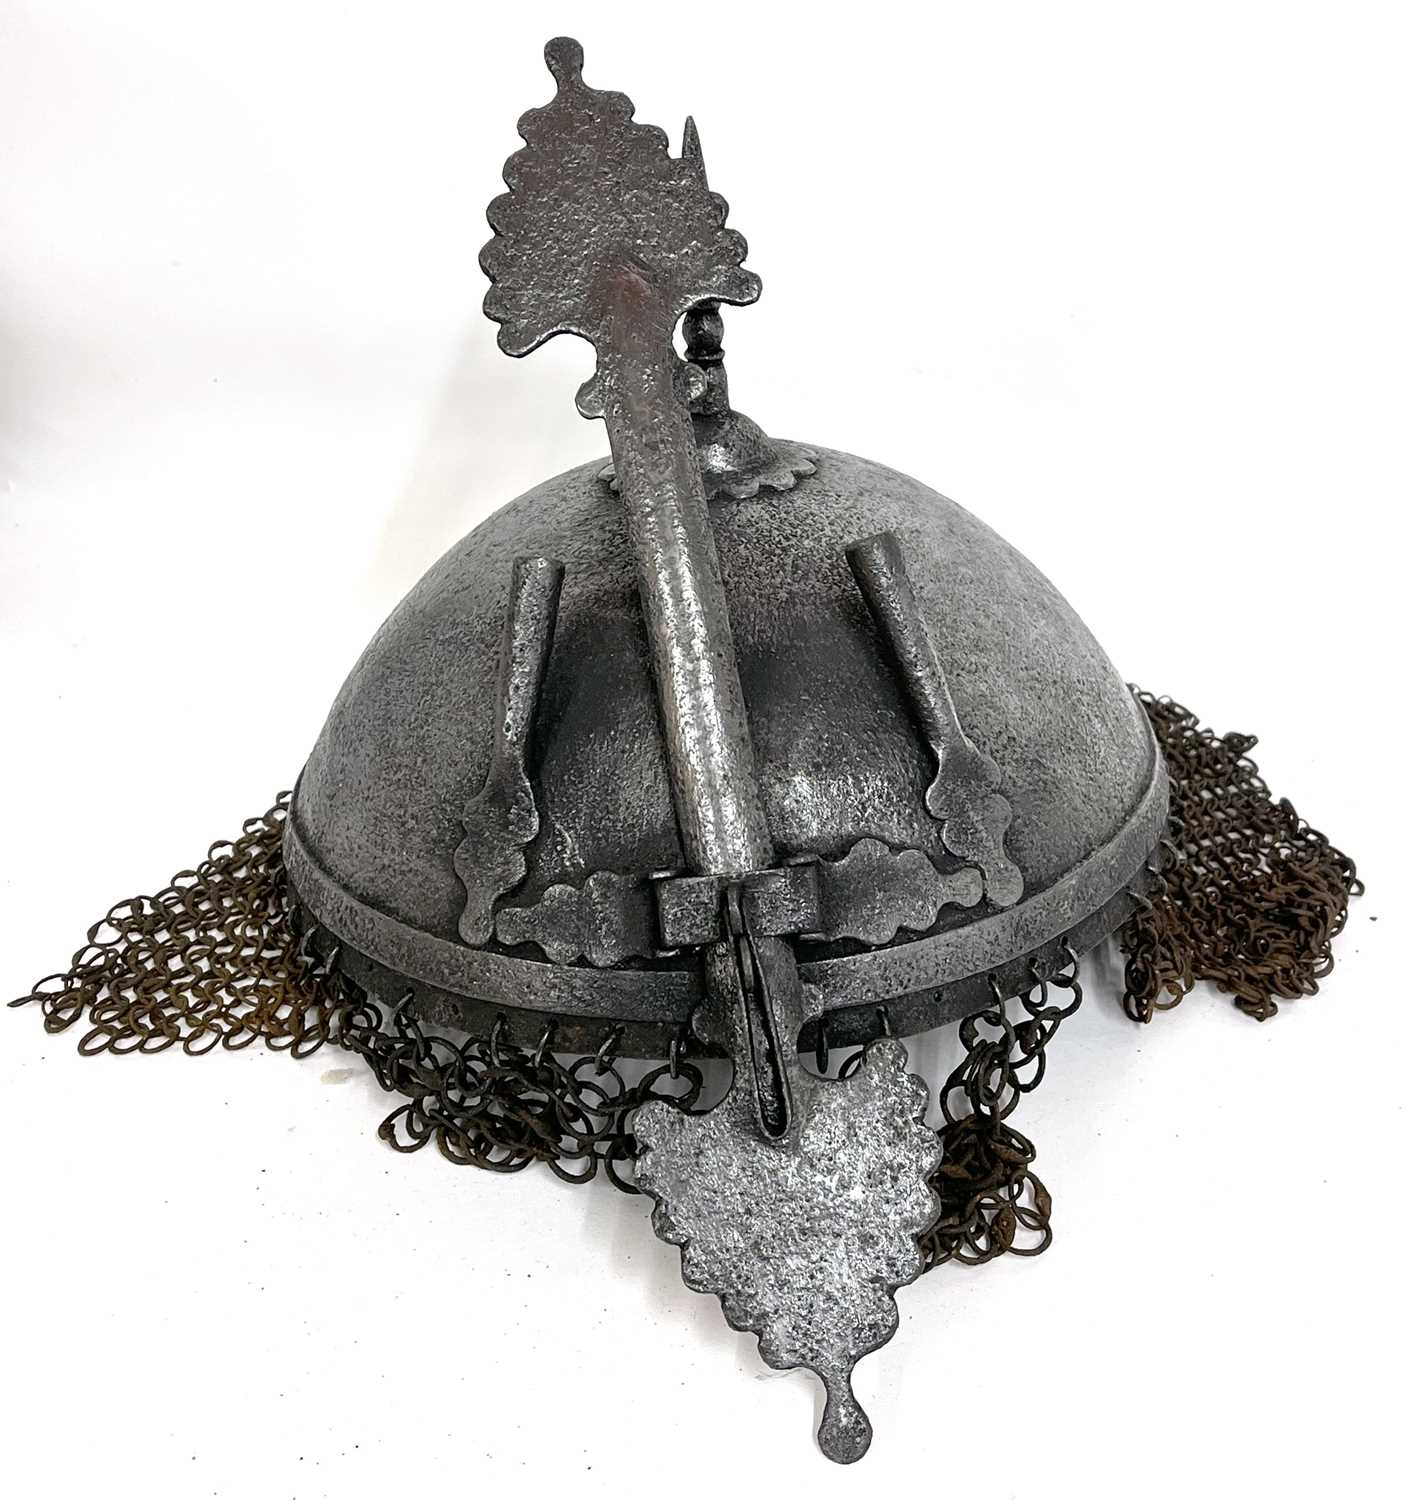 Late 19th Century Indo-Persian Kula - Khud helmet with a sliding nasal bar, twin plume sockets and - Image 10 of 10